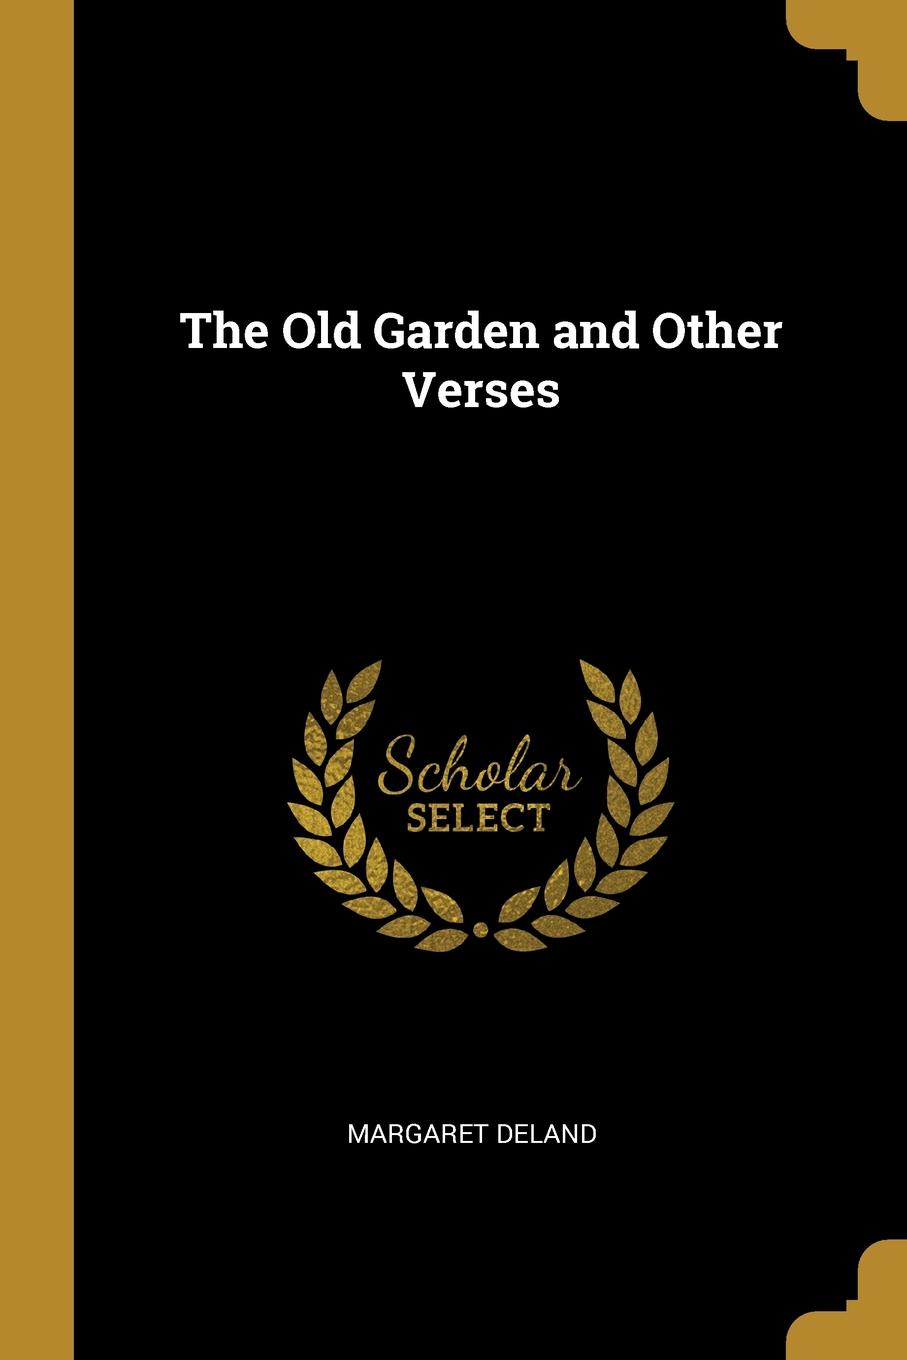 The Old Garden and Other Verses